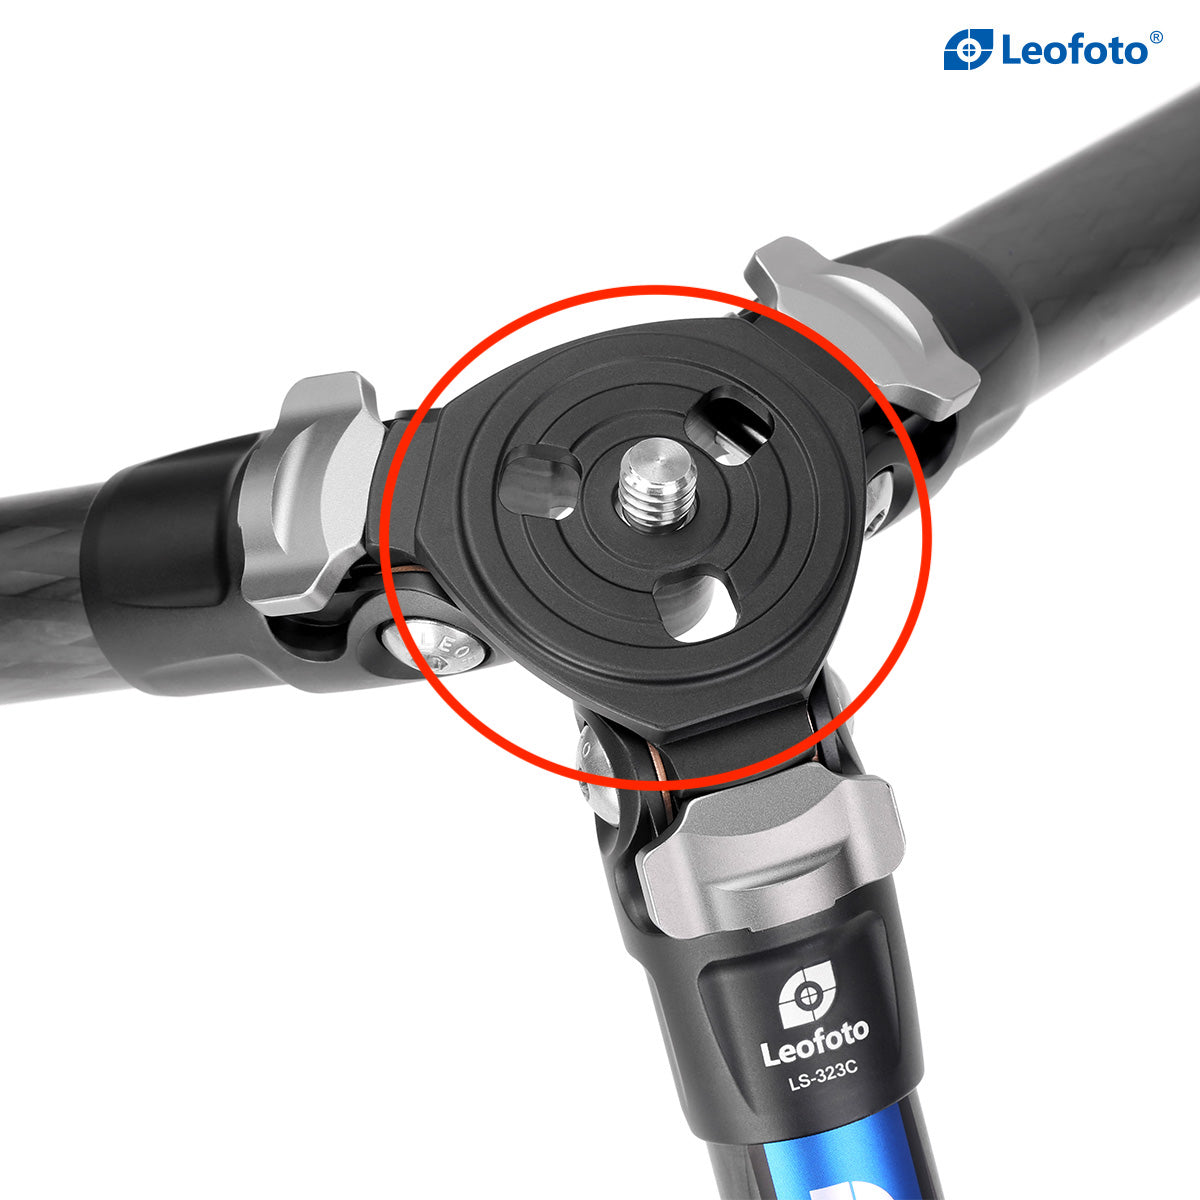 Leofoto Tripod Compact Apex | Convert from Standard to Compact Modular Apex | LM/SA Series to LS Series